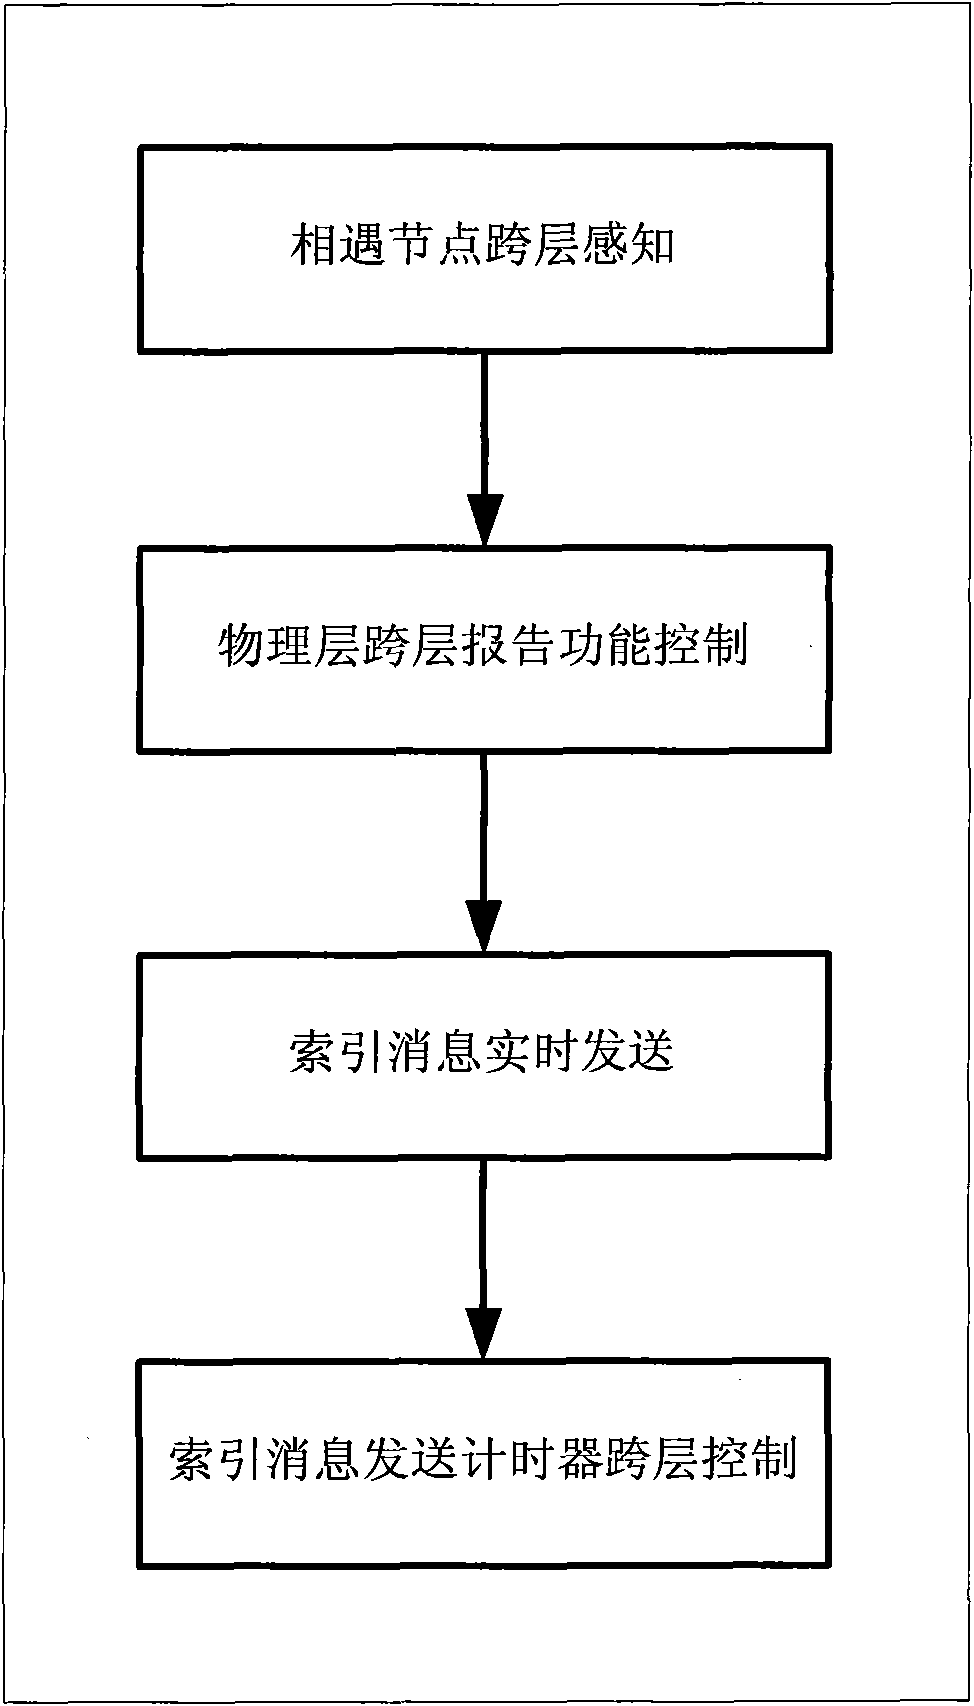 Method for quickly sensing meeting nodes based on cross-layer triggering in opportunistic network